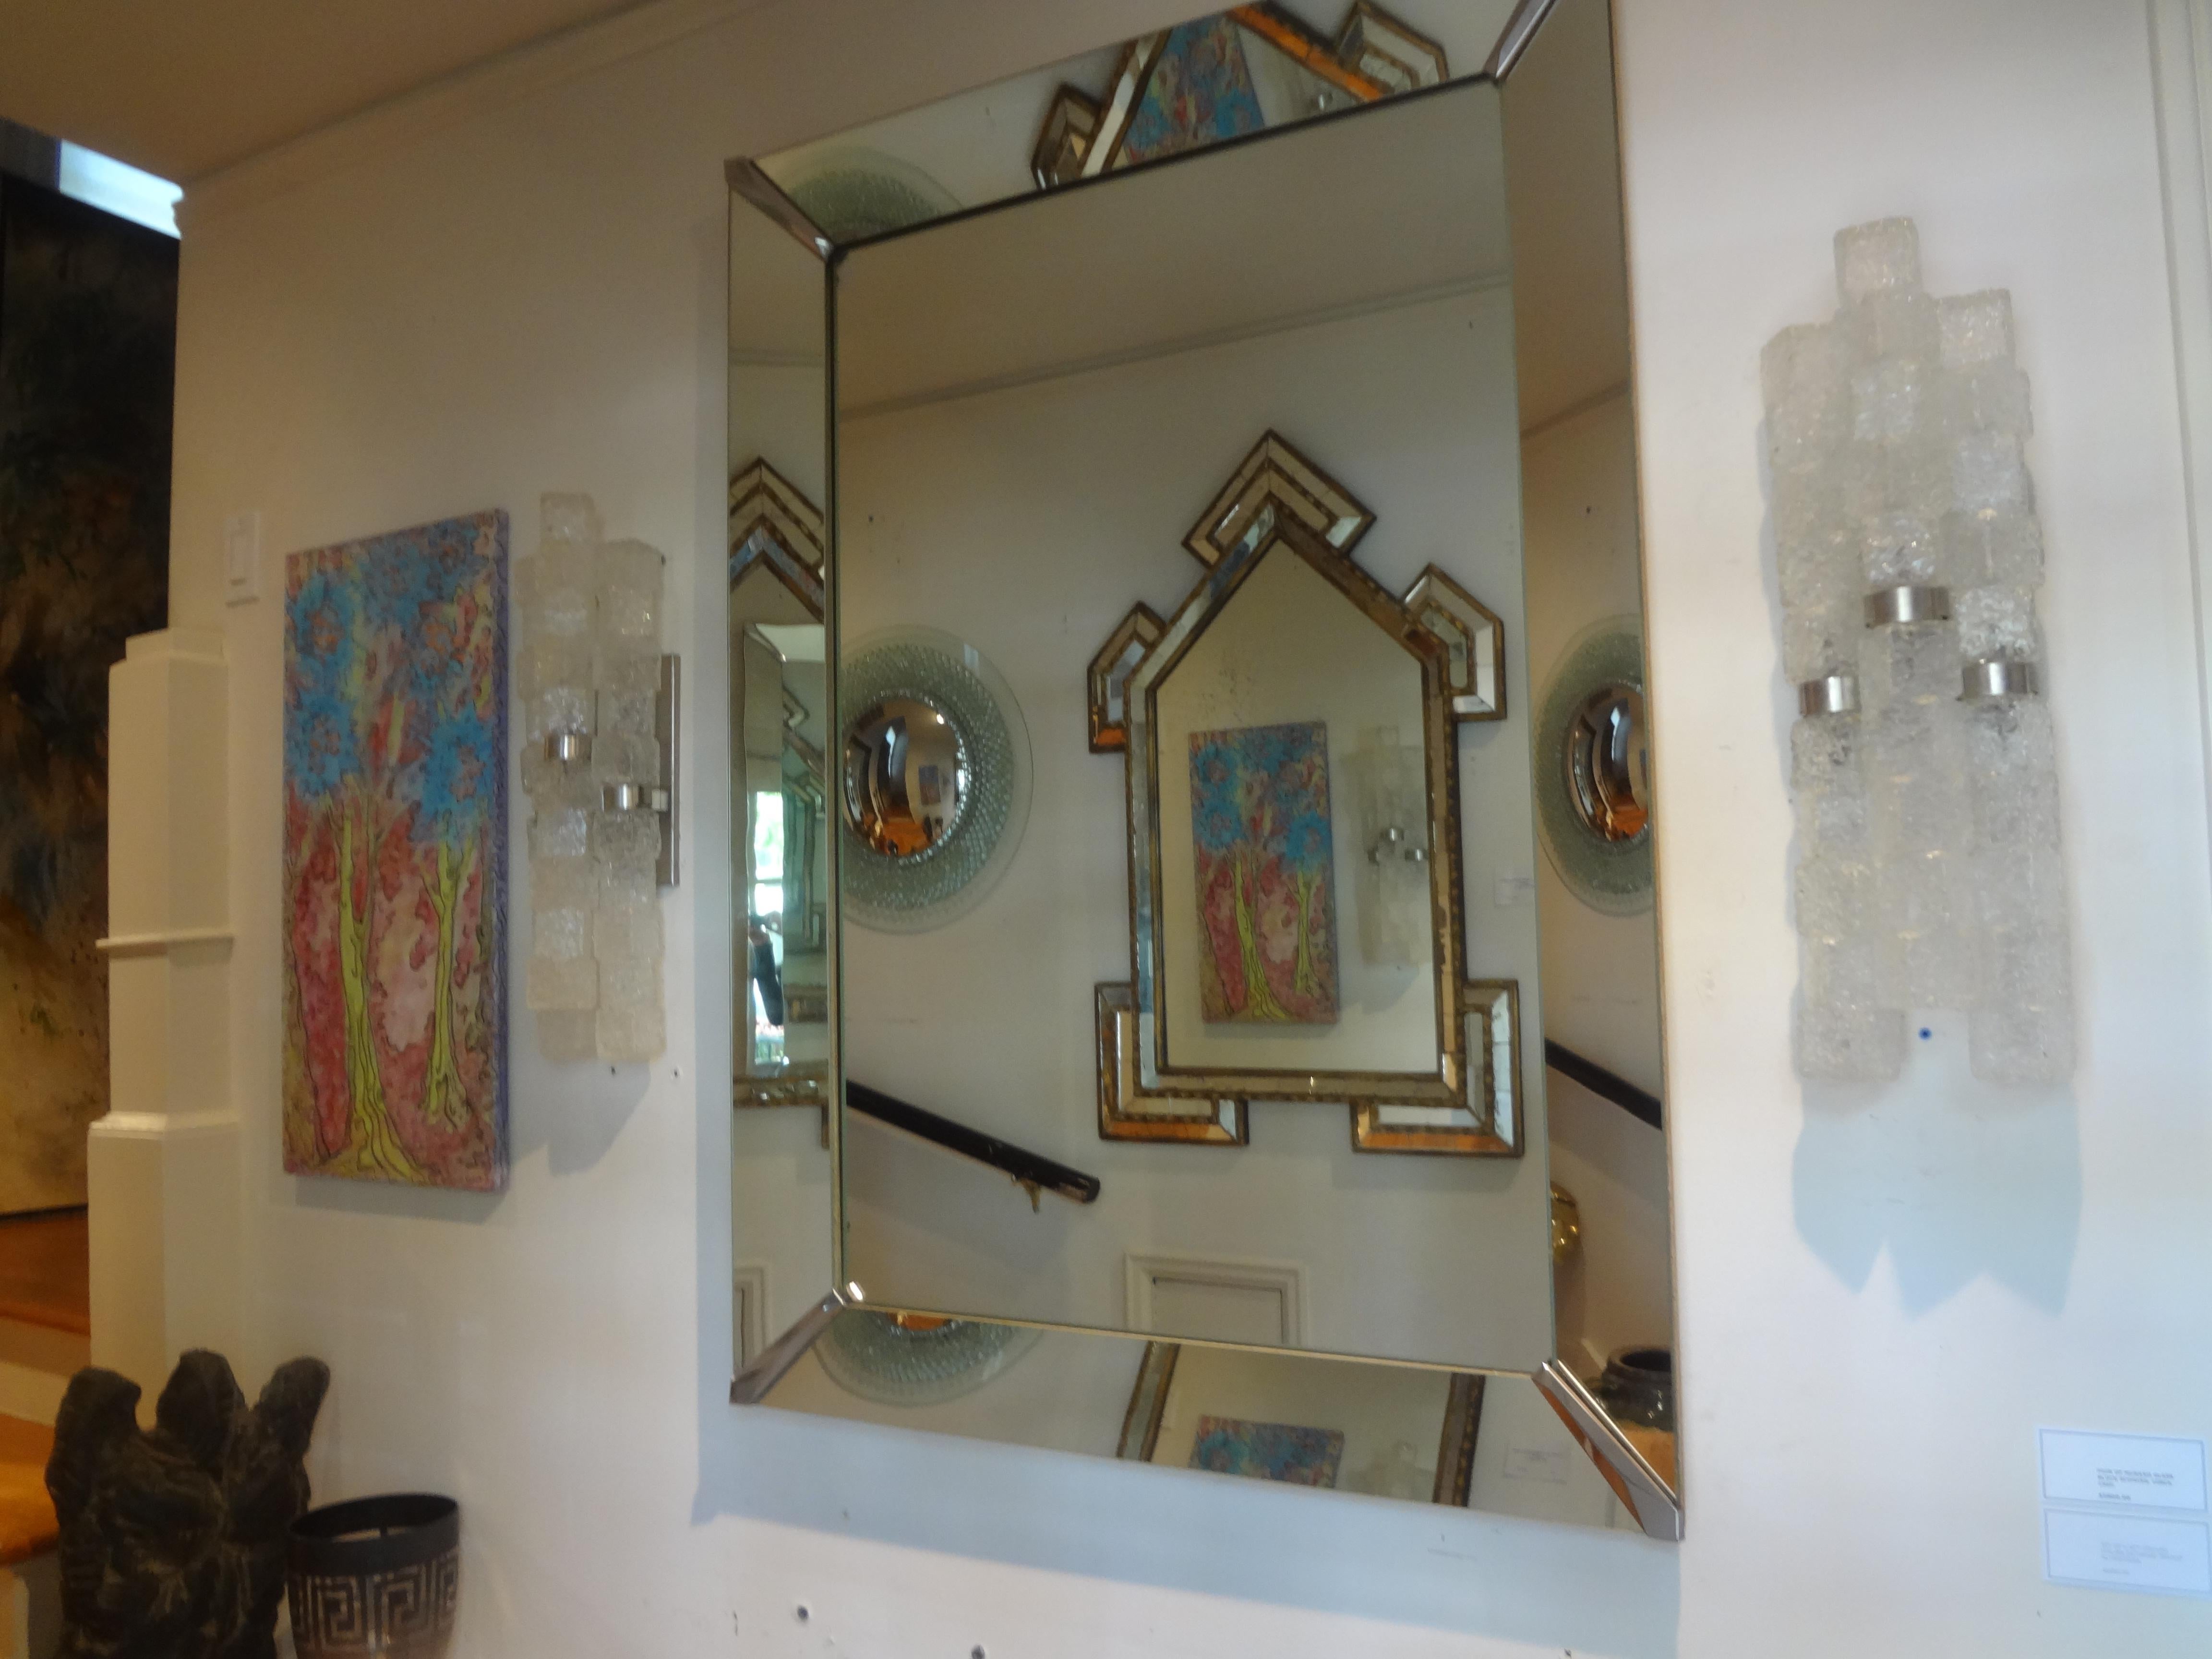 Vintage Italian Modern Venetian Style mirror.
Large mid century Italian rectangular three dimensional mirror with chrome corners.
This lovely mirror can be displayed either way, vertically or horizontally.
The clean lines of his vintage mirror